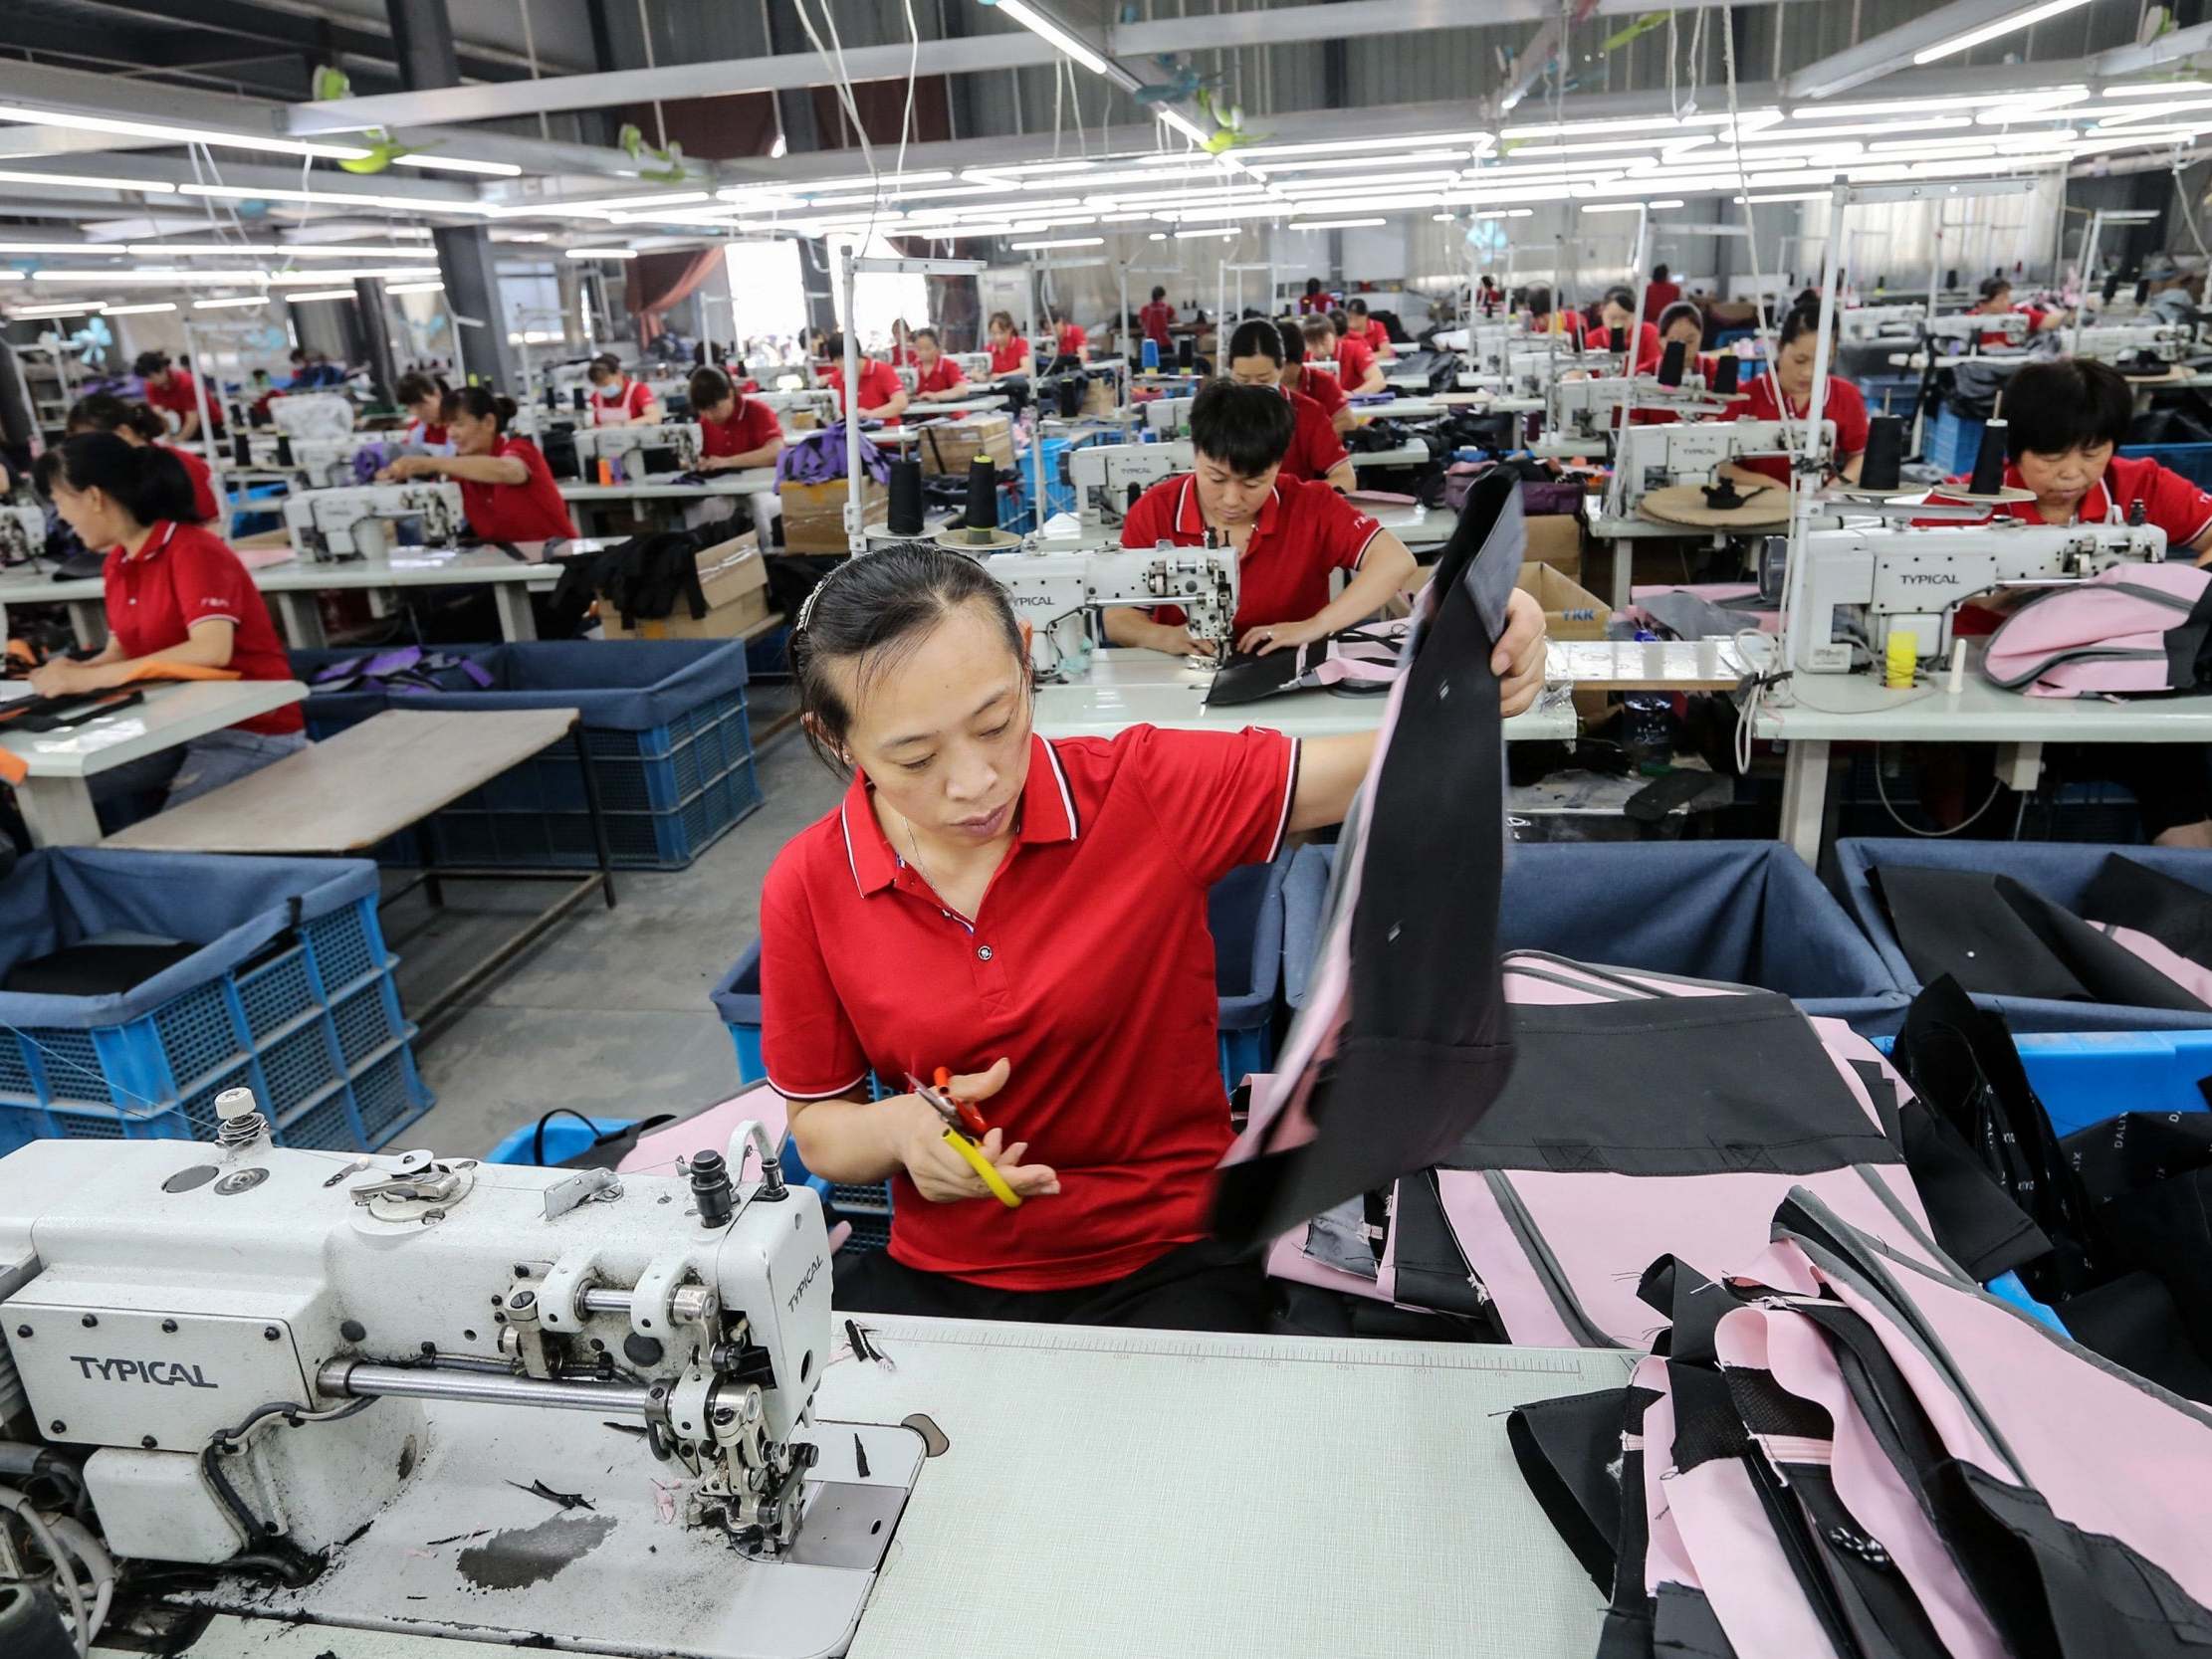 Economists say China's growth has been fuelled by the manufacturing sector